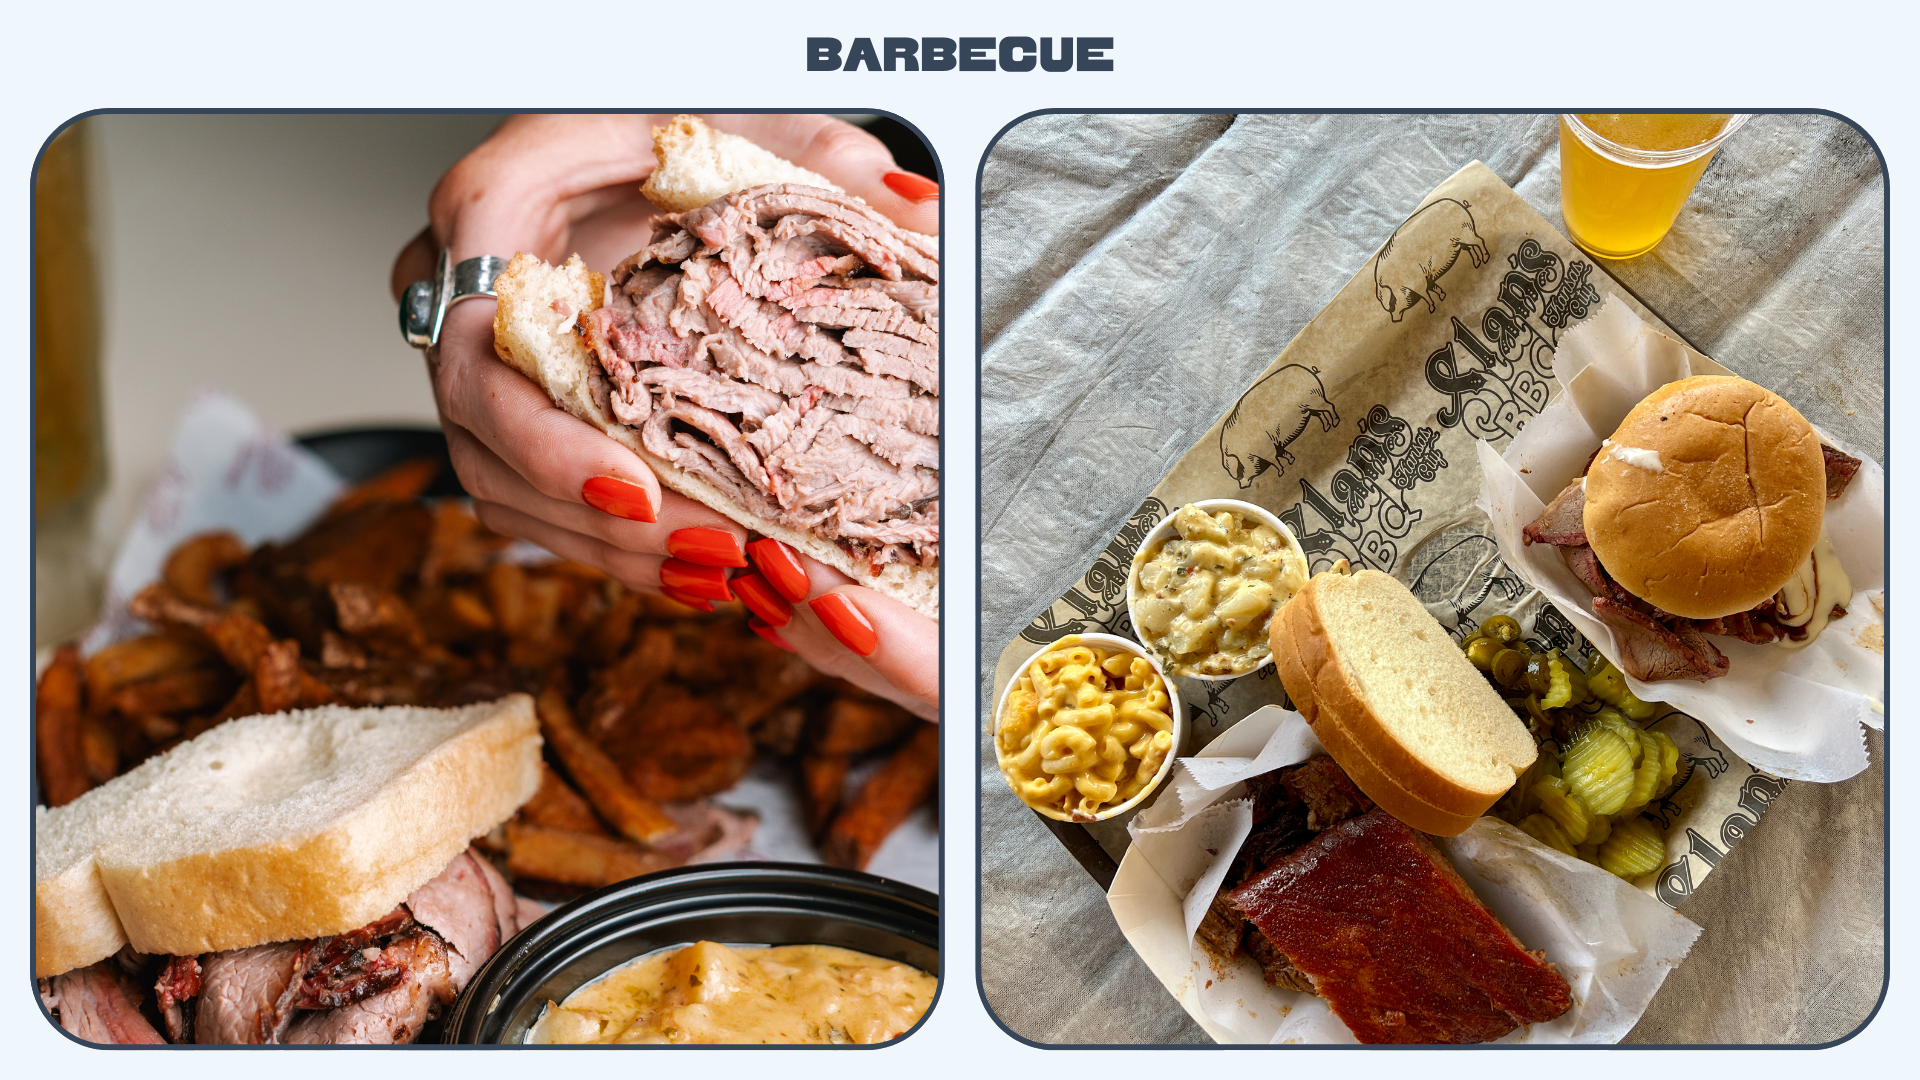 Kansas City BBQ with mac and cheese, meat sandwiches and drinks